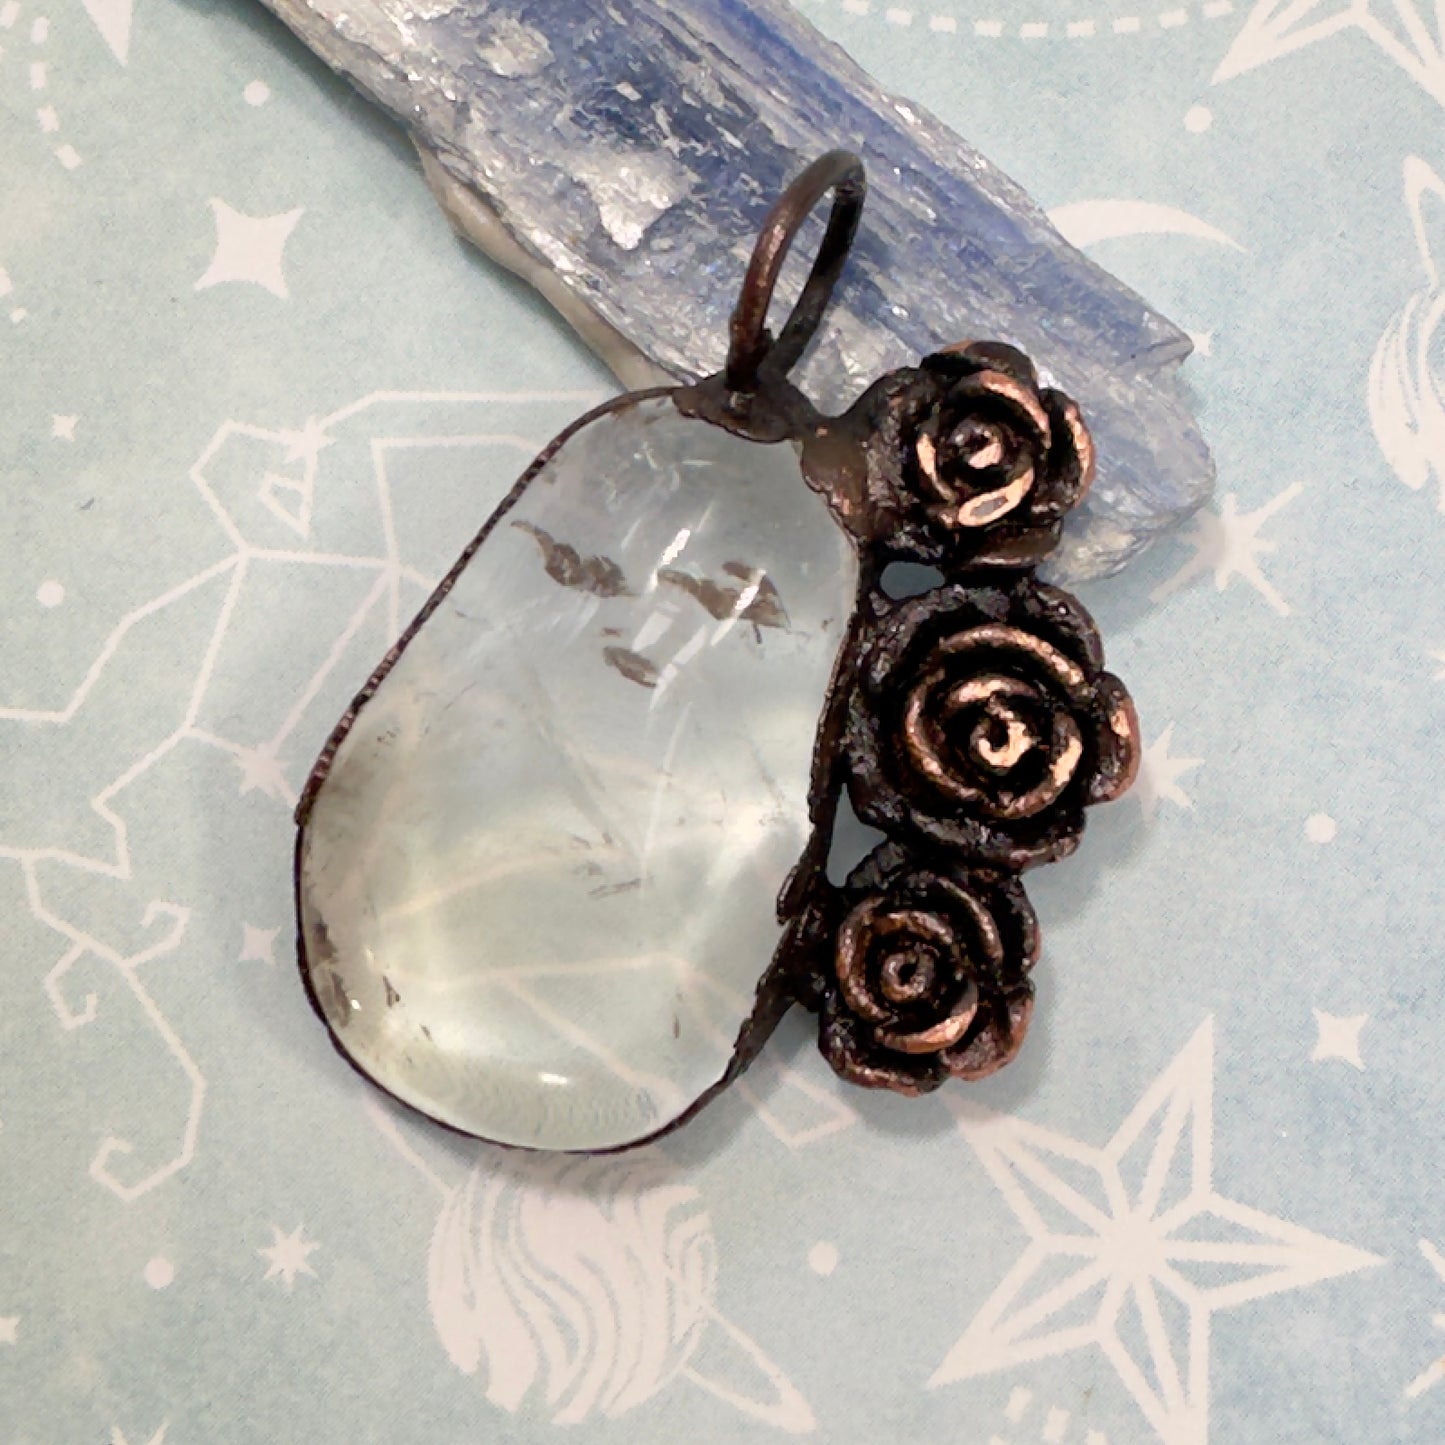 Copper roses surrounding a healing clear quartz crystal necklace 